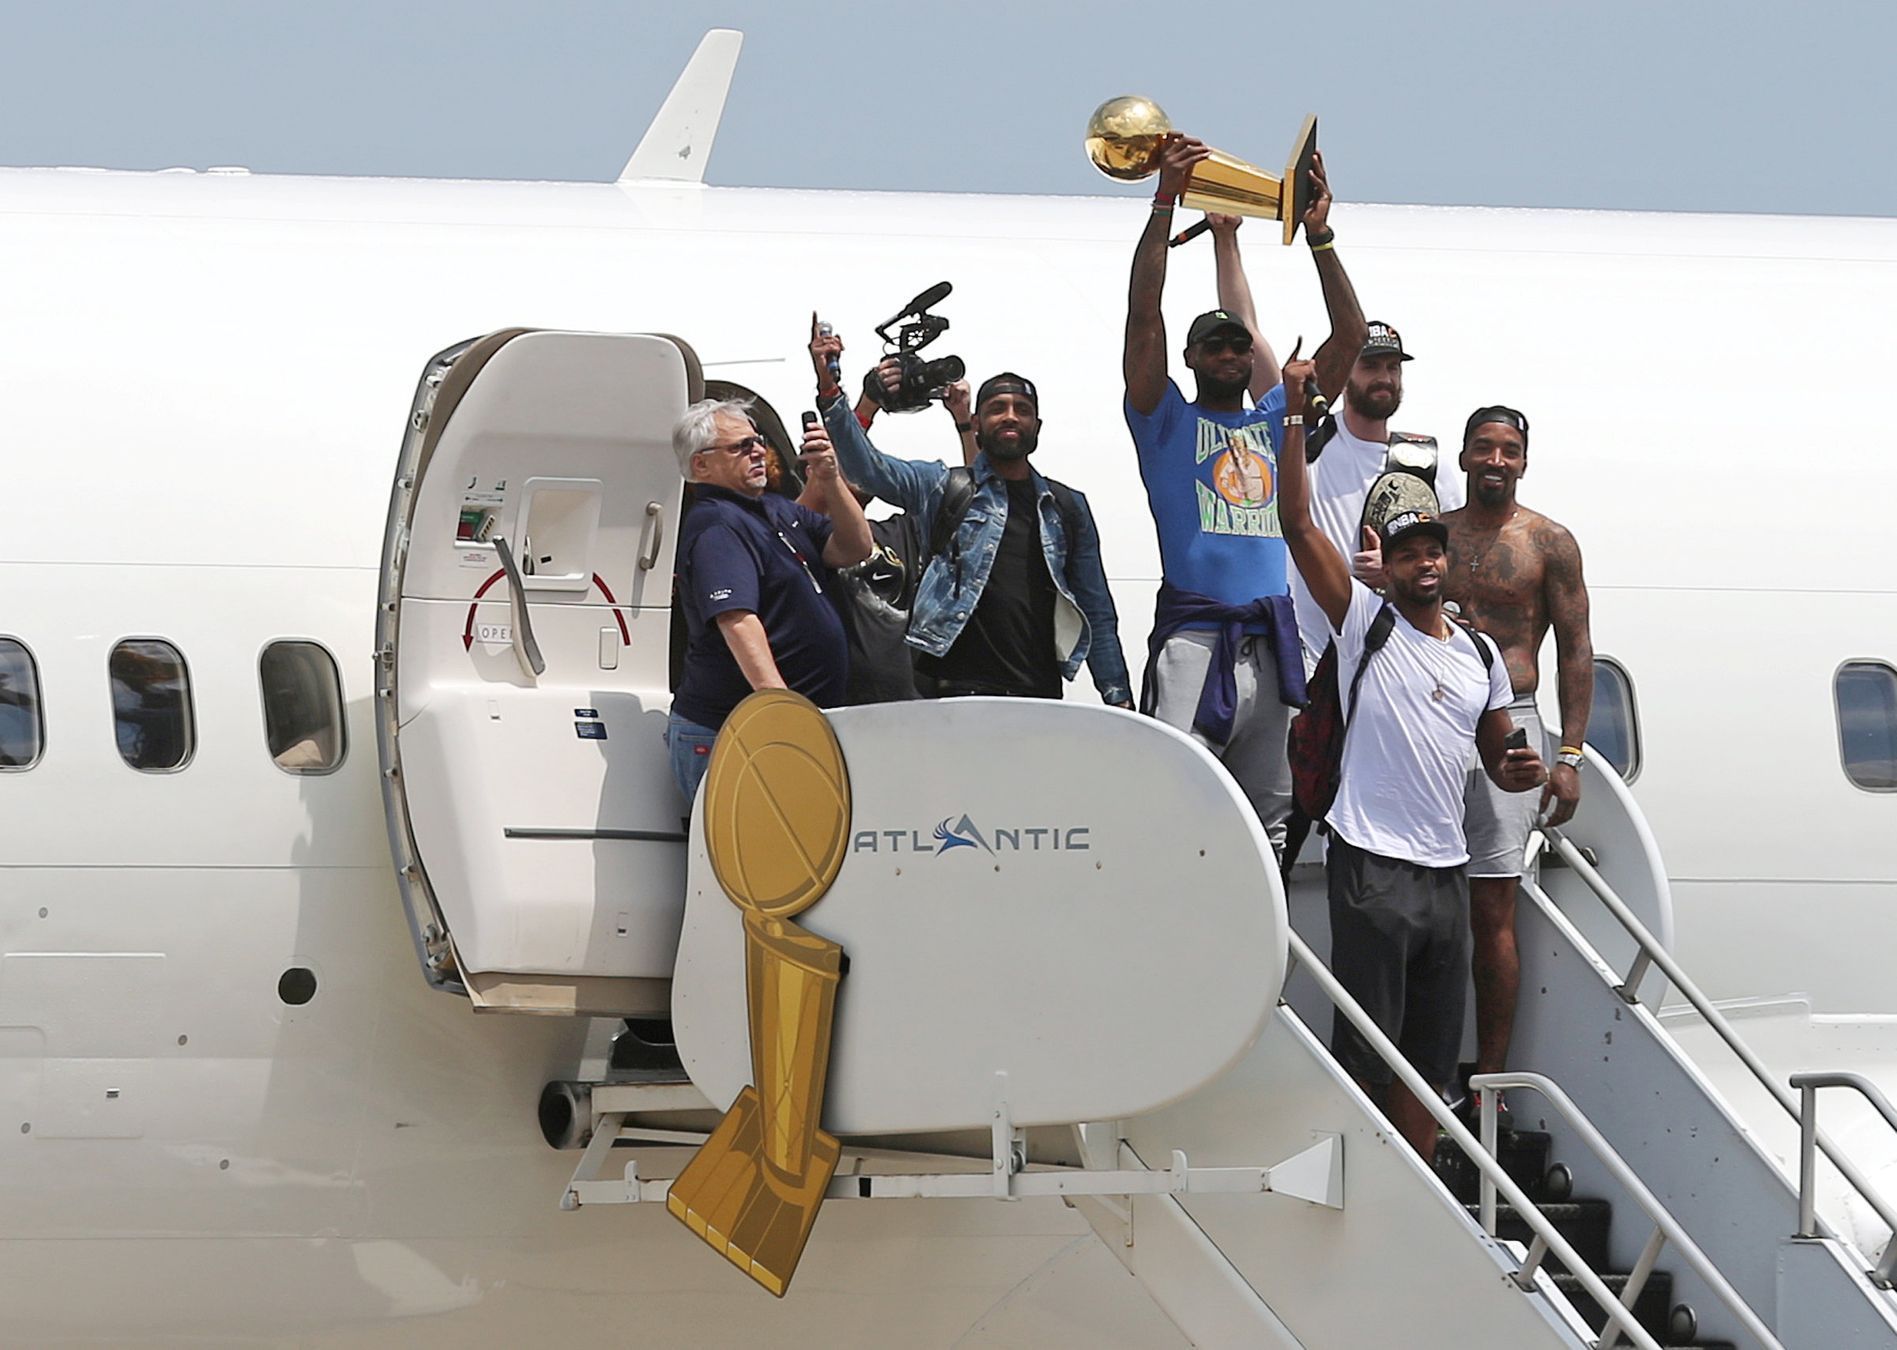 Cleveland Cavaliers Kyrie Irving, LeBron James, Kevin Love, JR Smith and Tristan Thompson arrive home to a welcome party in Cleveland